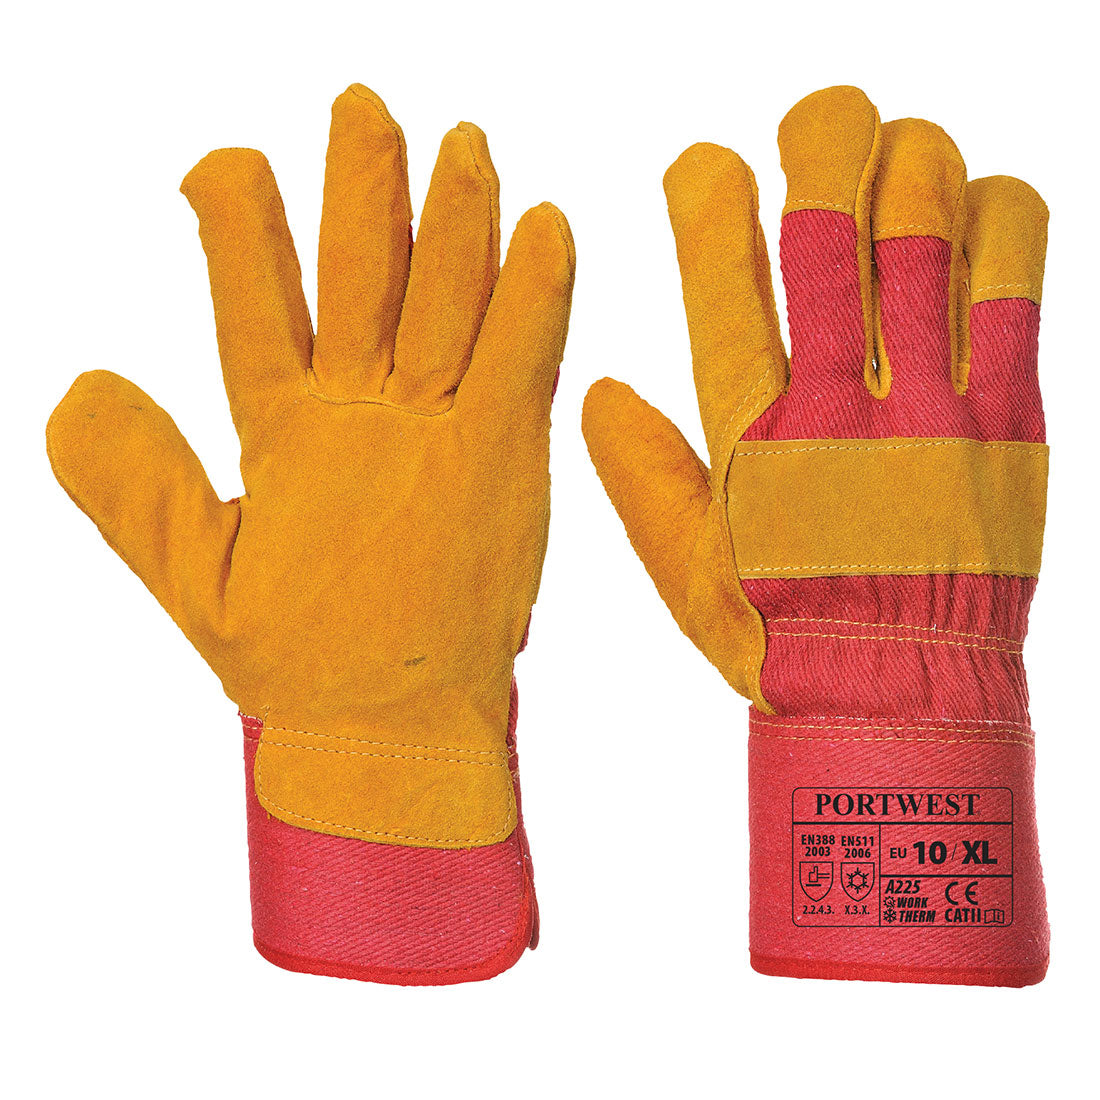 Portwest Fleece Lined Rigger Glove A225 - New England Safety Supply